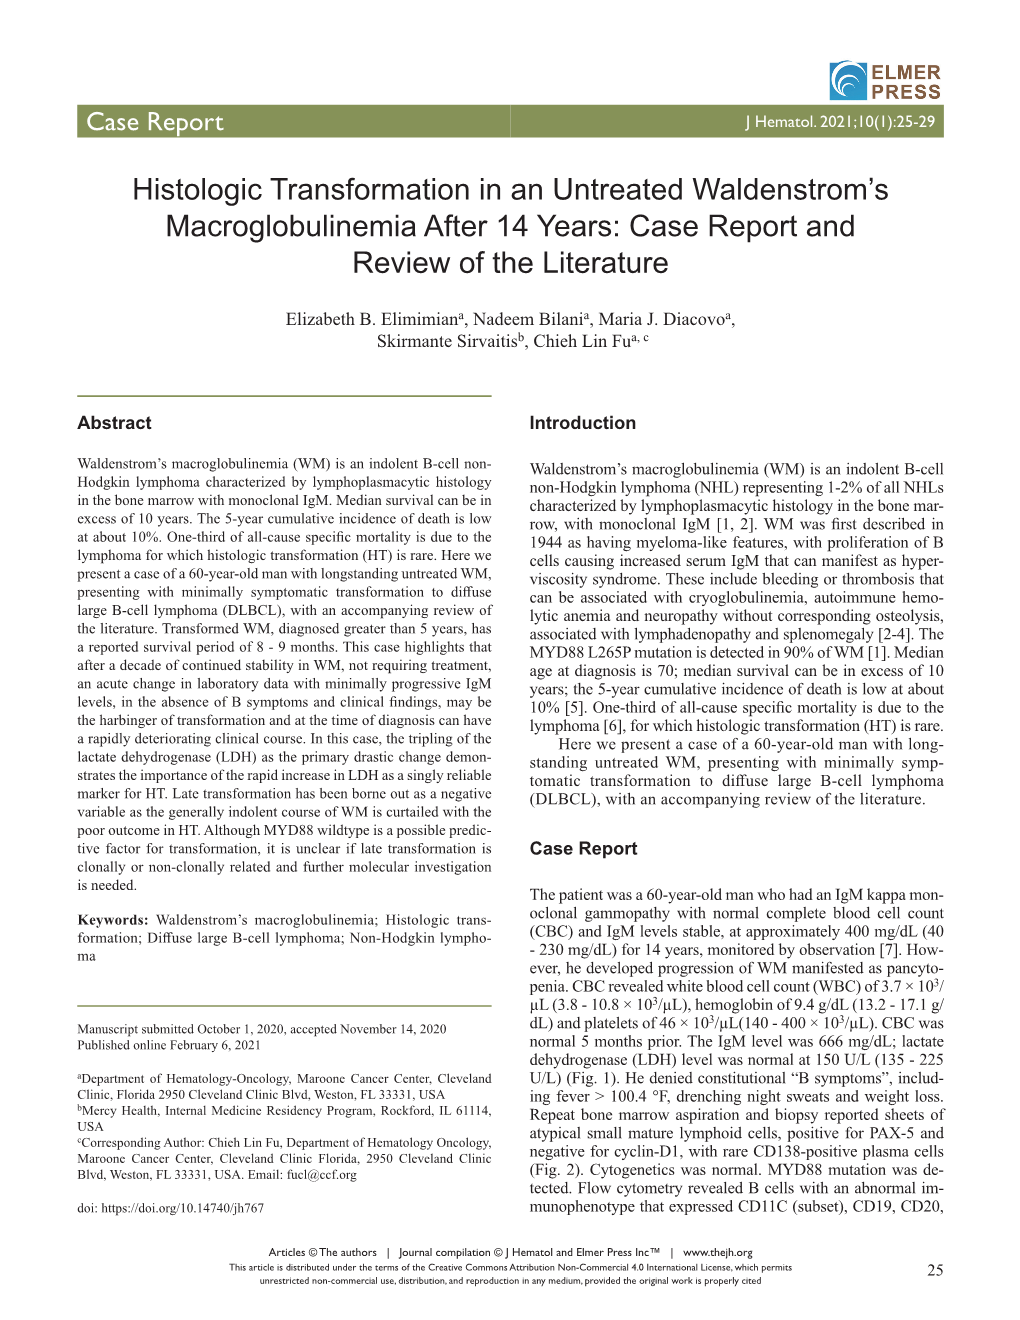 Histologic Transformation in an Untreated Waldenstrom's Macroglobulinemia After 14 Years